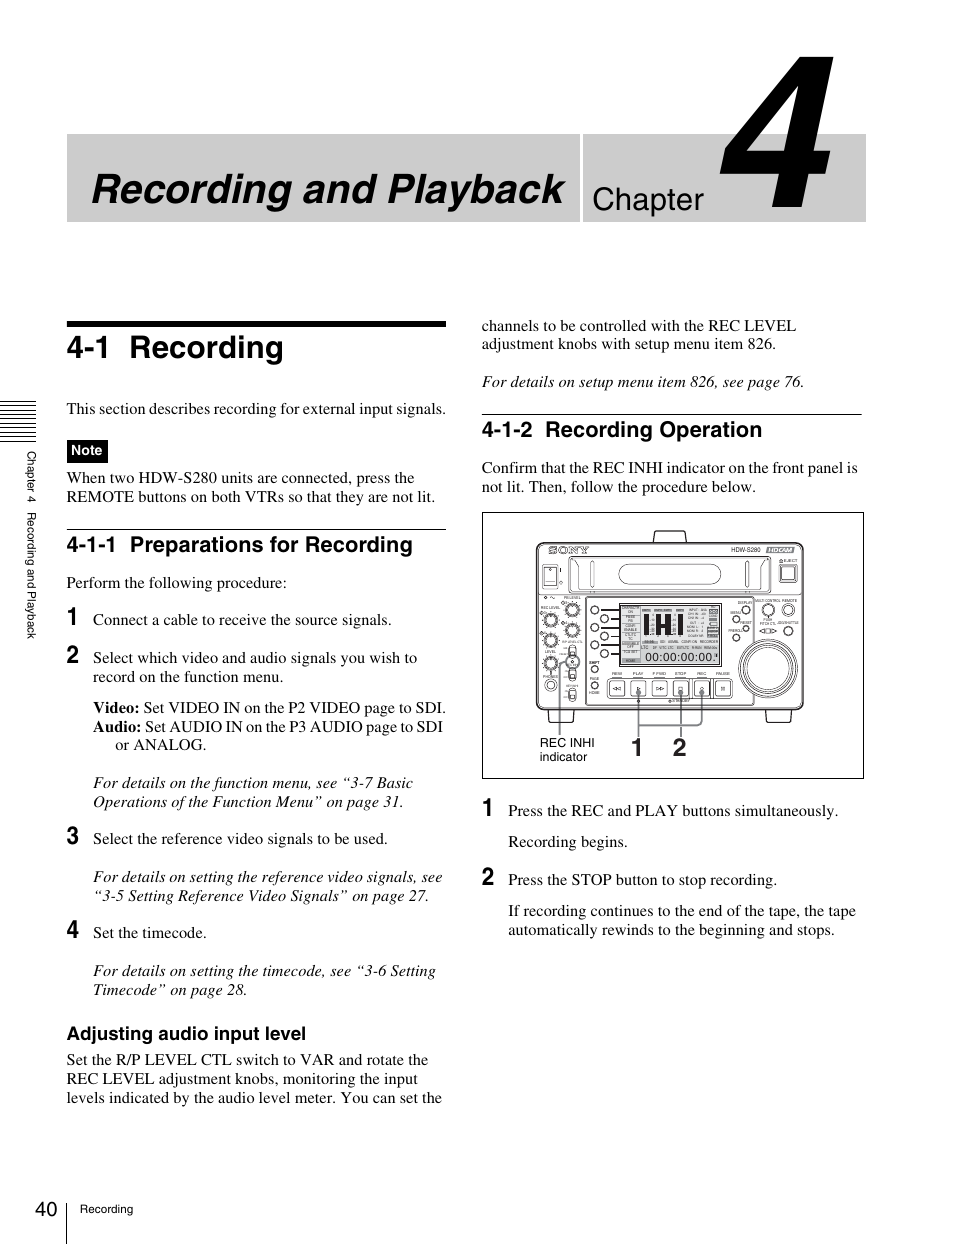 Chapter 4 recording and playback, 1 recording, 1-1 preparations for recording | 1-2 recording operation, Recording, Preparations for recording, Recording operation, Recording and playback, Chapter, Adjusting audio input level | Sony HDW-S280 User Manual | Page 40 / 94